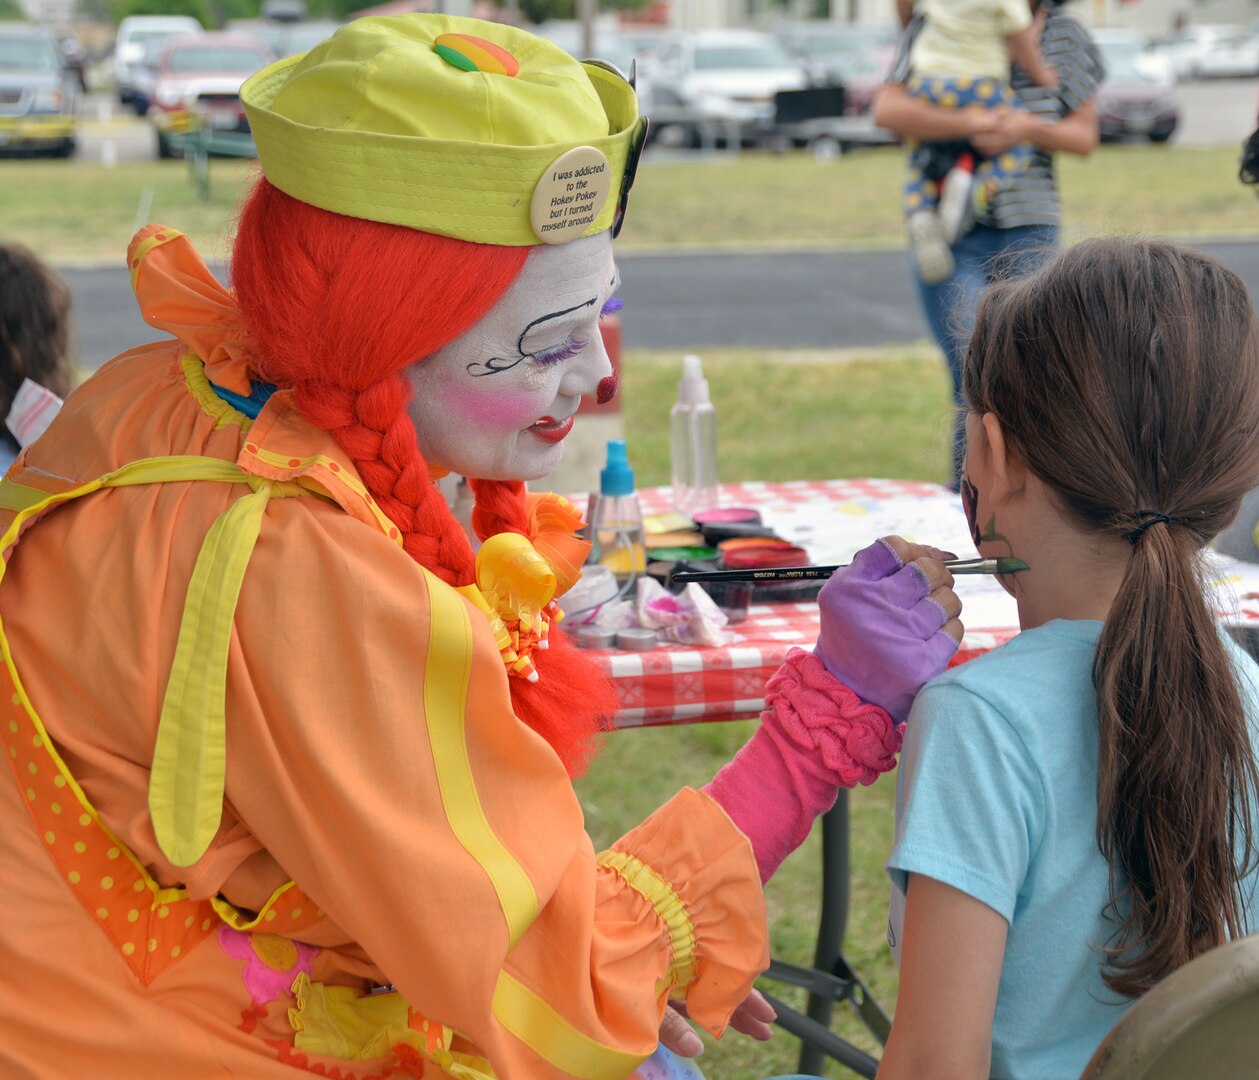 Children in attendance were treated to face painting as one of the many activities offered at the annual Cowboys for Heroes chuckwagon event at Joint Base San Antonio-Fort Sam Houston March 30.